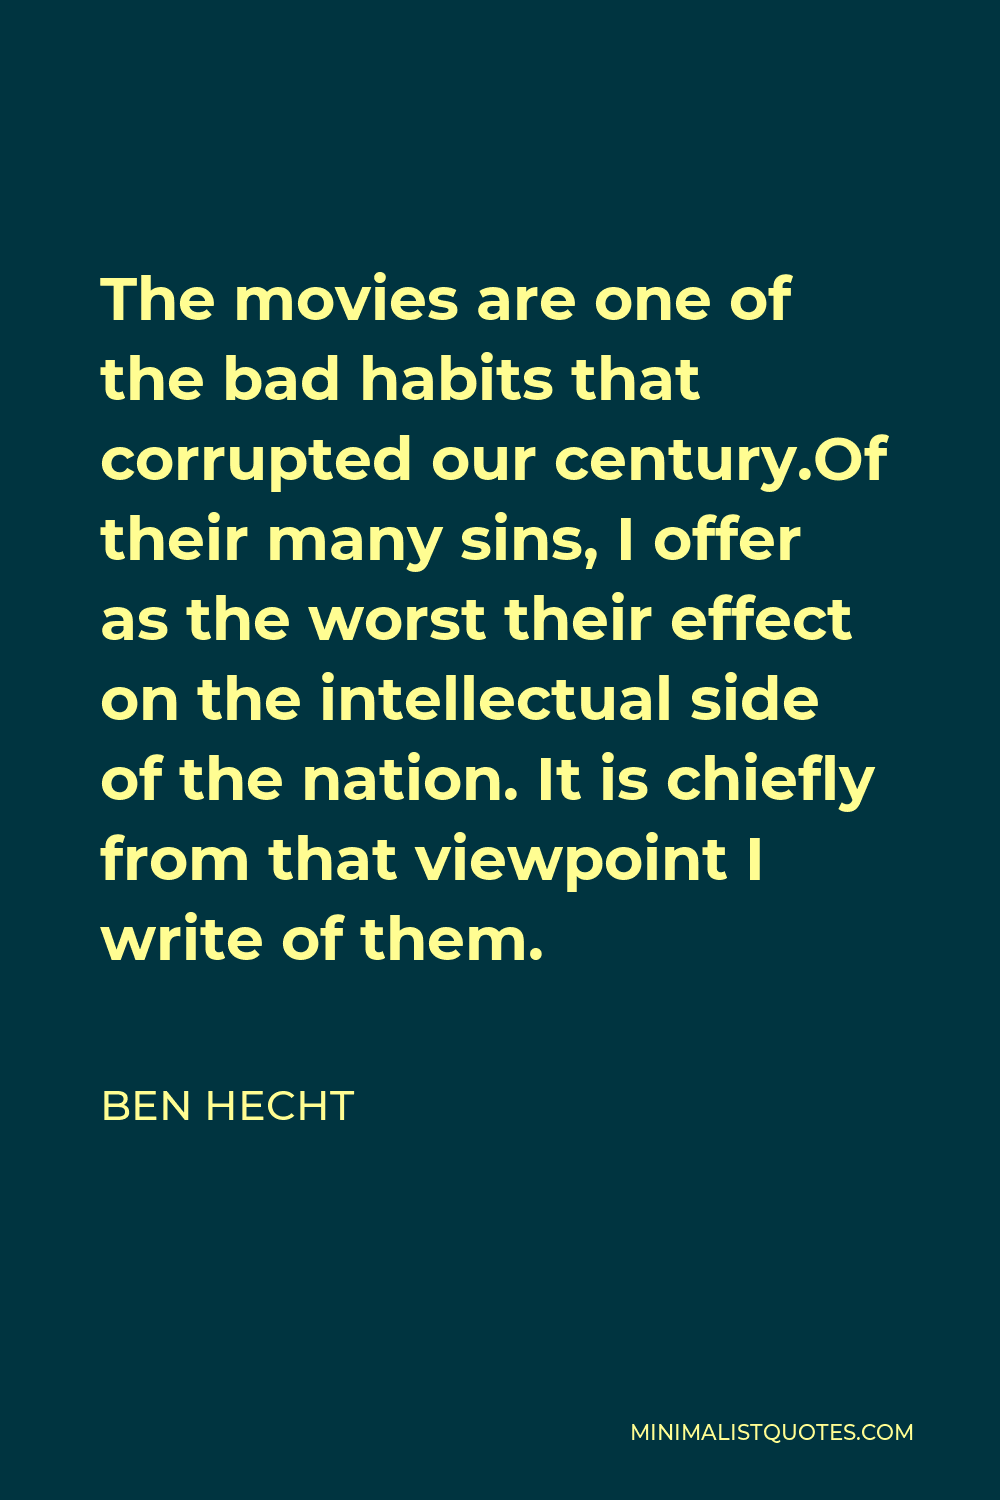 Ben Hecht Quote - The movies are one of the bad habits that corrupted our century.Of their many sins, I offer as the worst their effect on the intellectual side of the nation. It is chiefly from that viewpoint I write of them.